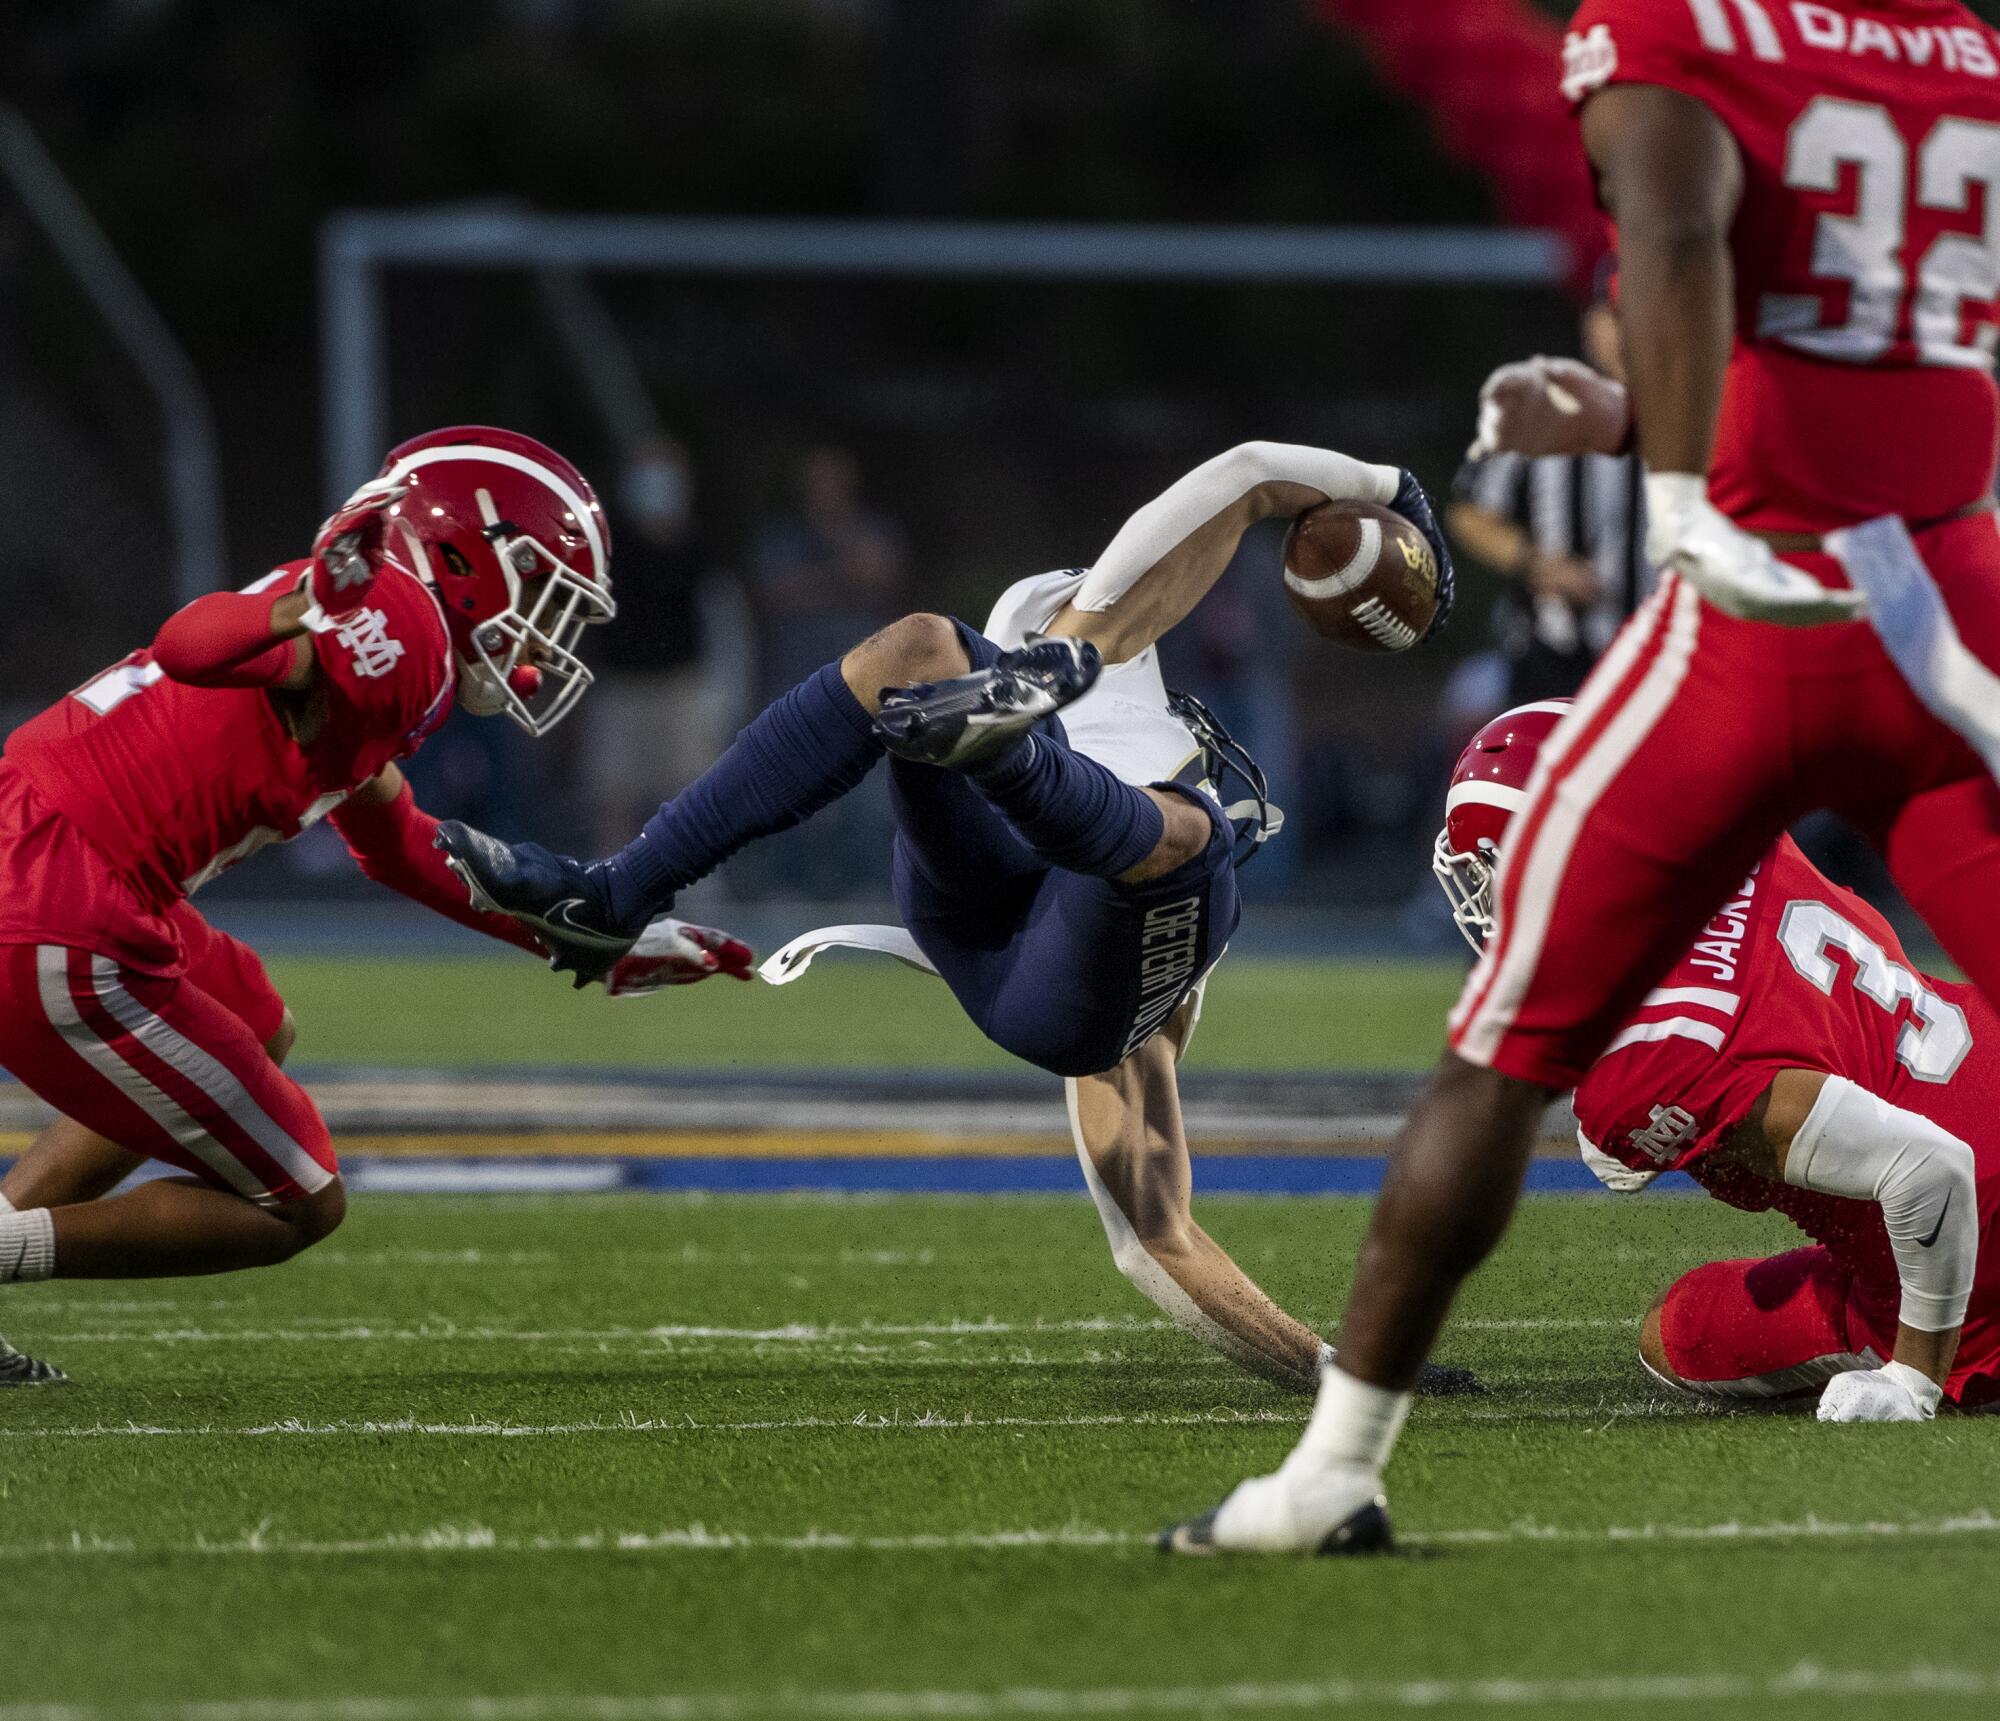 St. John Bosco wide receiver Logan Booher is upended by Mater Dei's Kassius Ashtani and Domani Jackson.